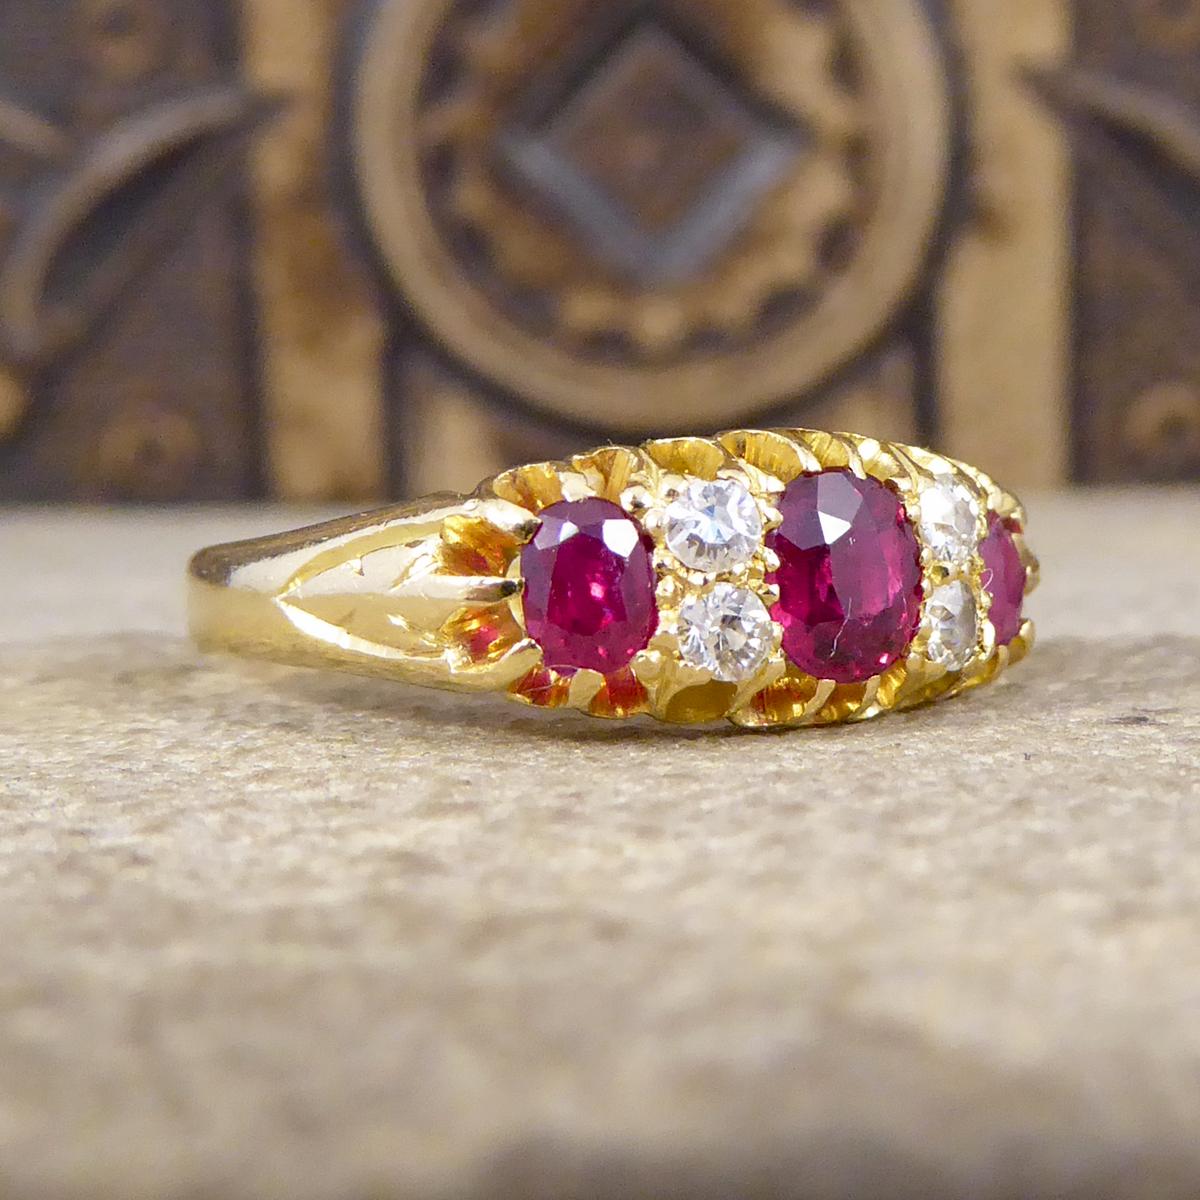 This gorgeous Edwardian ring has been hand crafted with superb coloured stones. With alternating Rubies and old cut Diamonds, this classic ring holds a 0.33ct oval cut Ruby in the centre with a 0.16ct Oval cut Ruby on either end divided by two